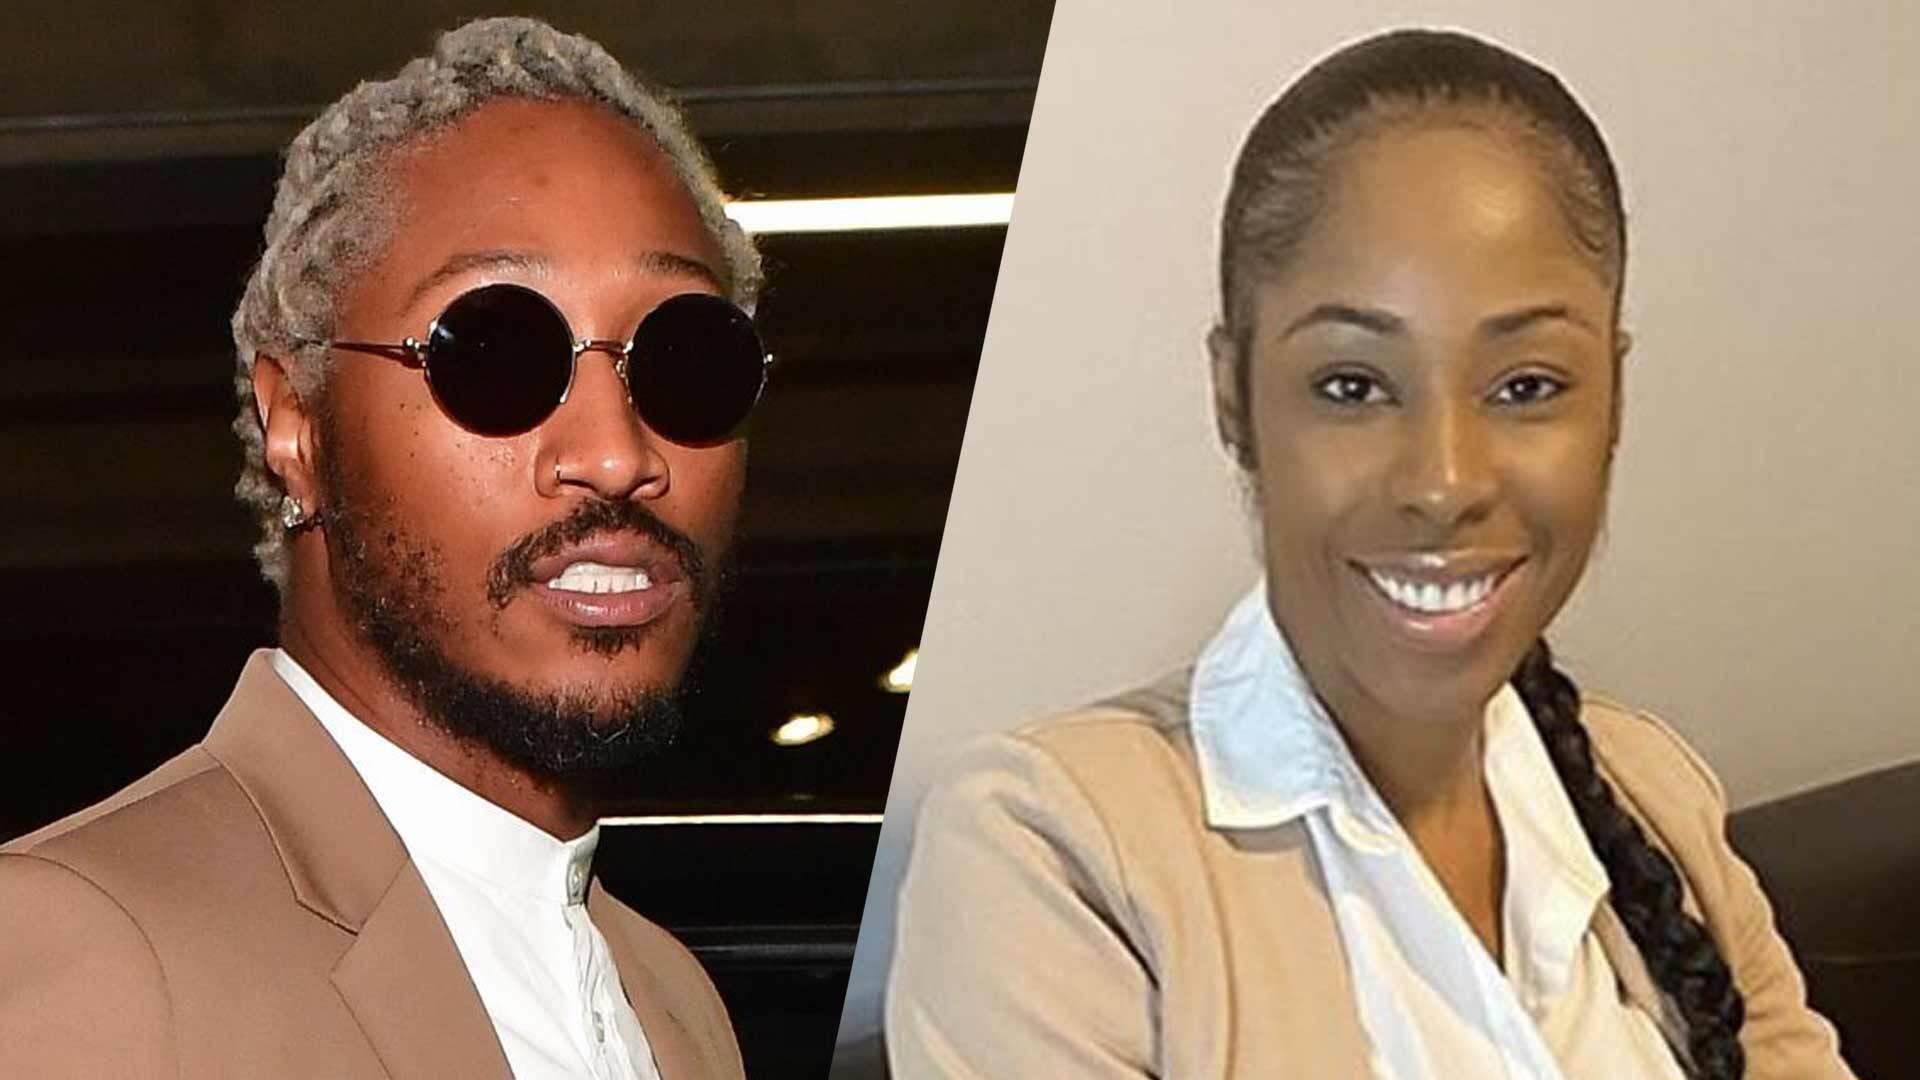 Future’s Baby Mama Eliza Reign Fires Back At Rapper’s ‘Ugly’ Twitter Rant